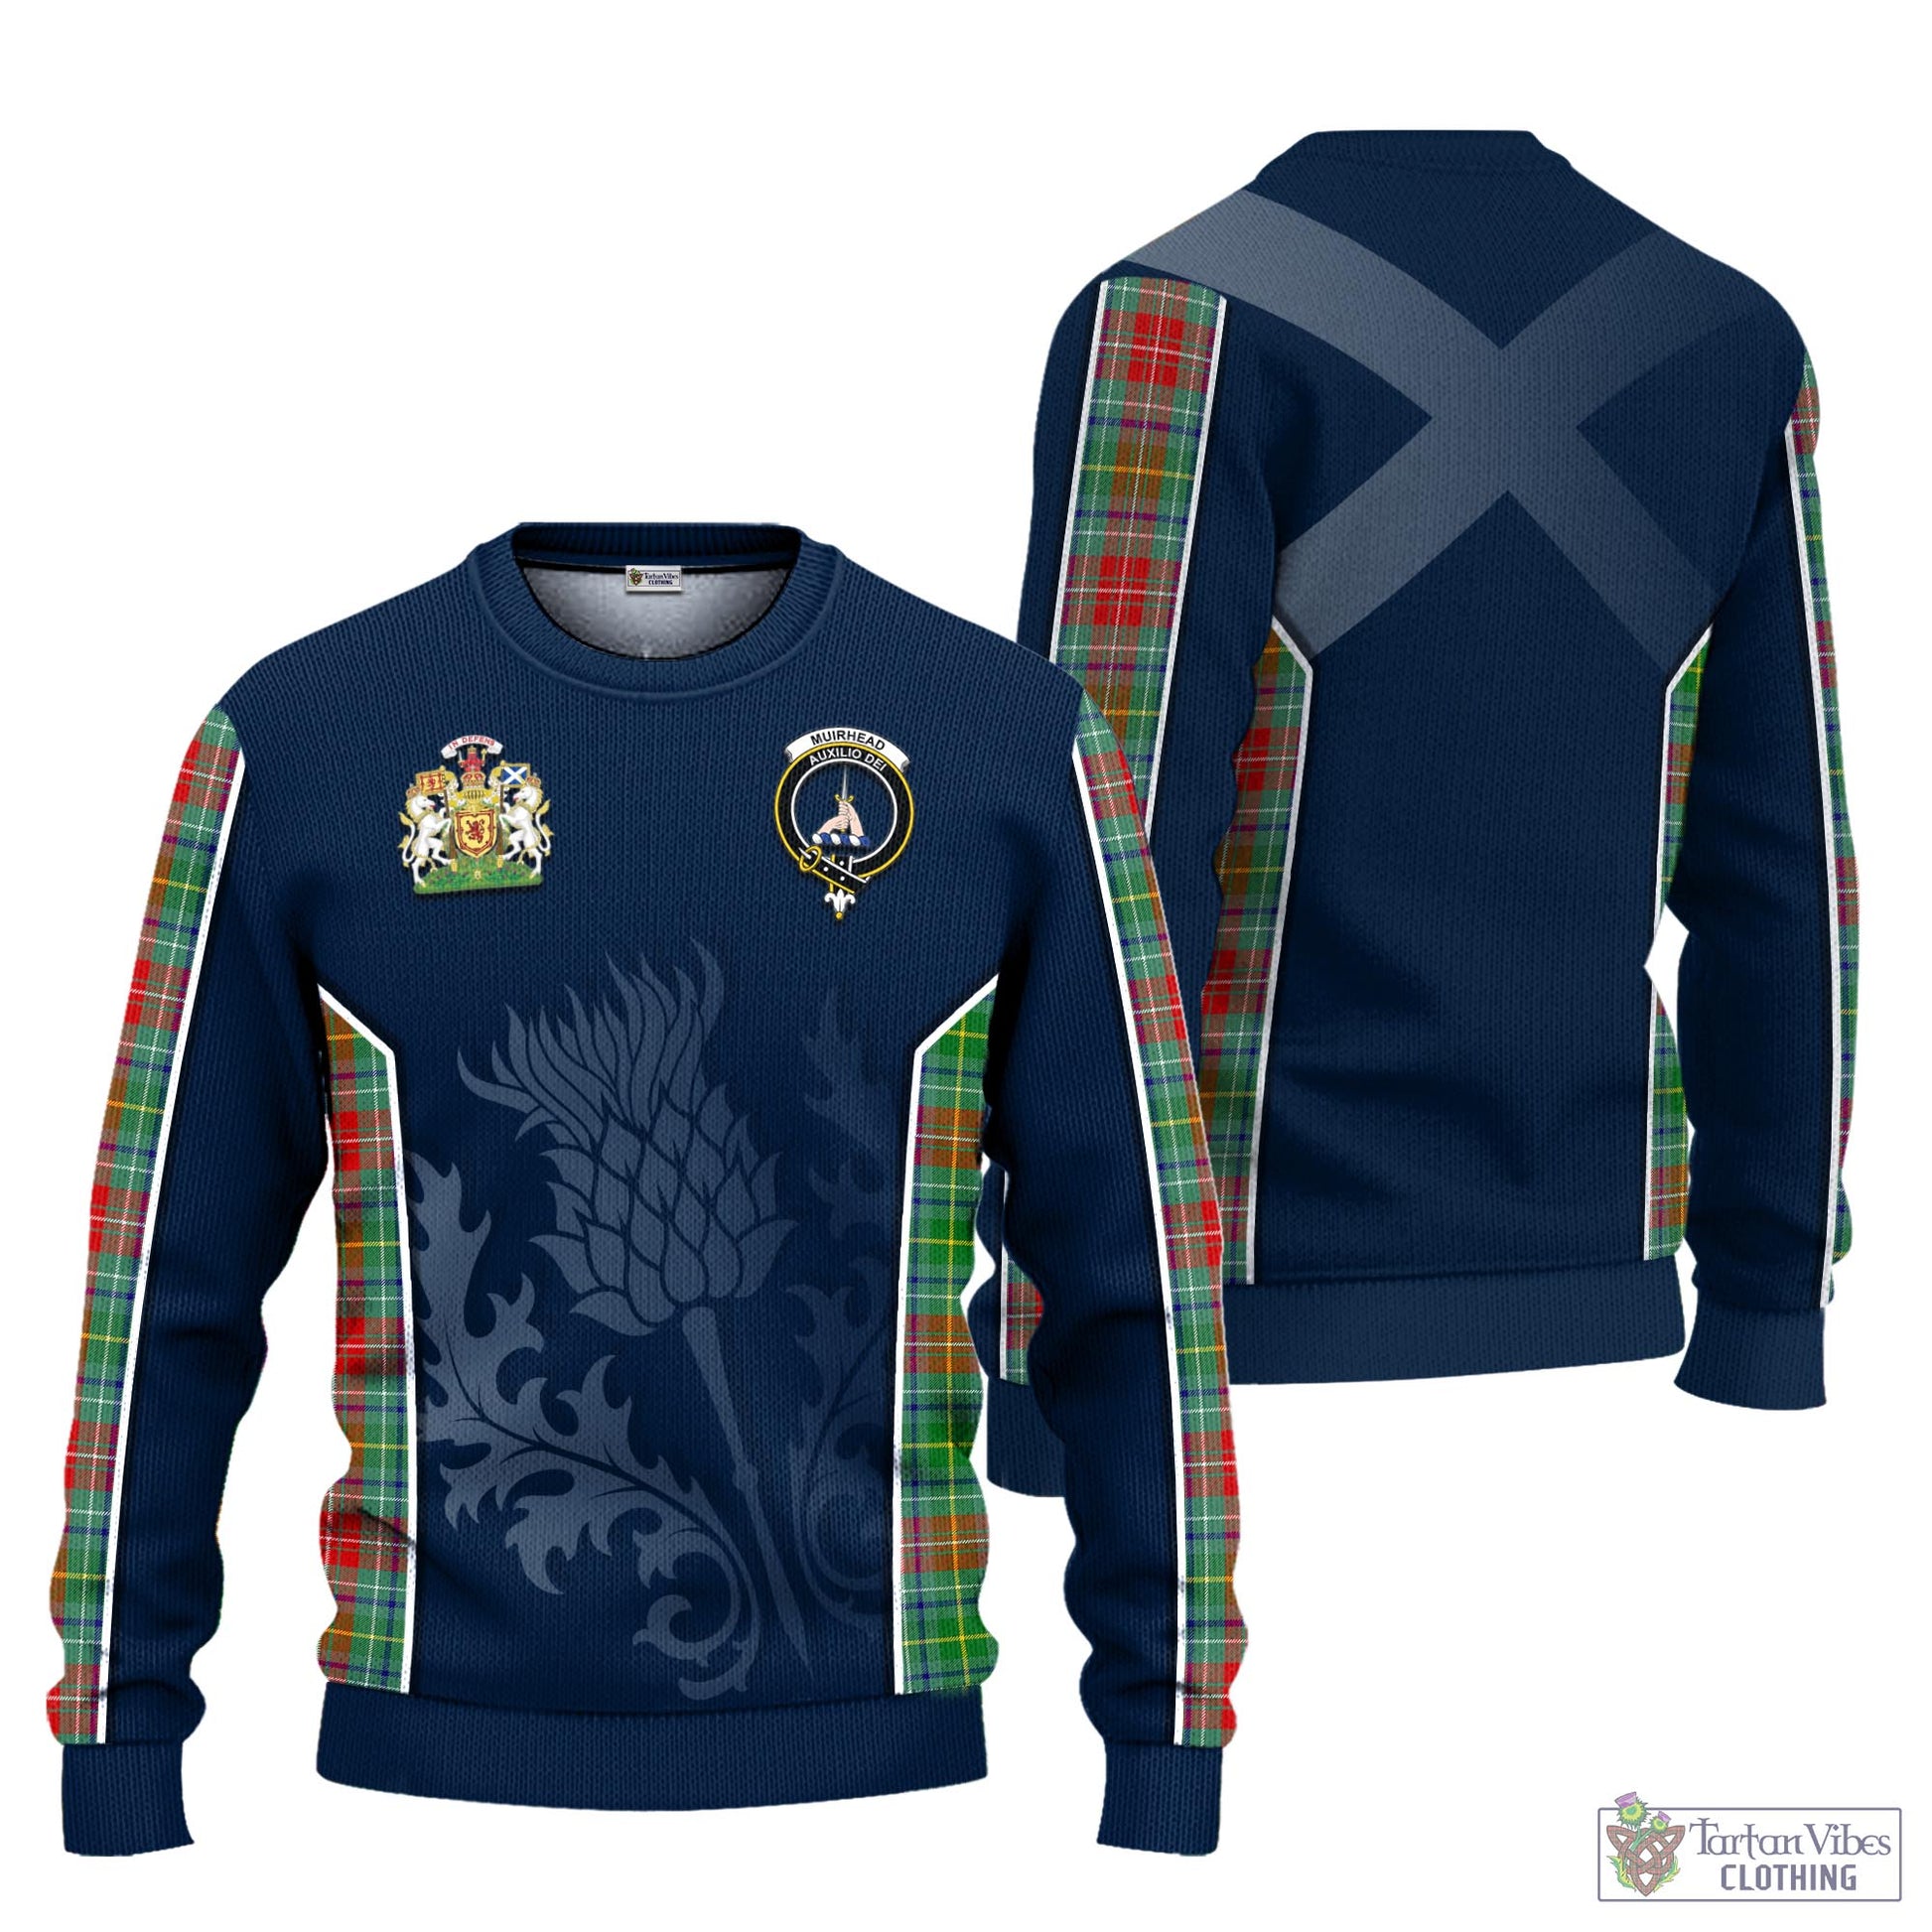 Tartan Vibes Clothing Muirhead Tartan Knitted Sweatshirt with Family Crest and Scottish Thistle Vibes Sport Style